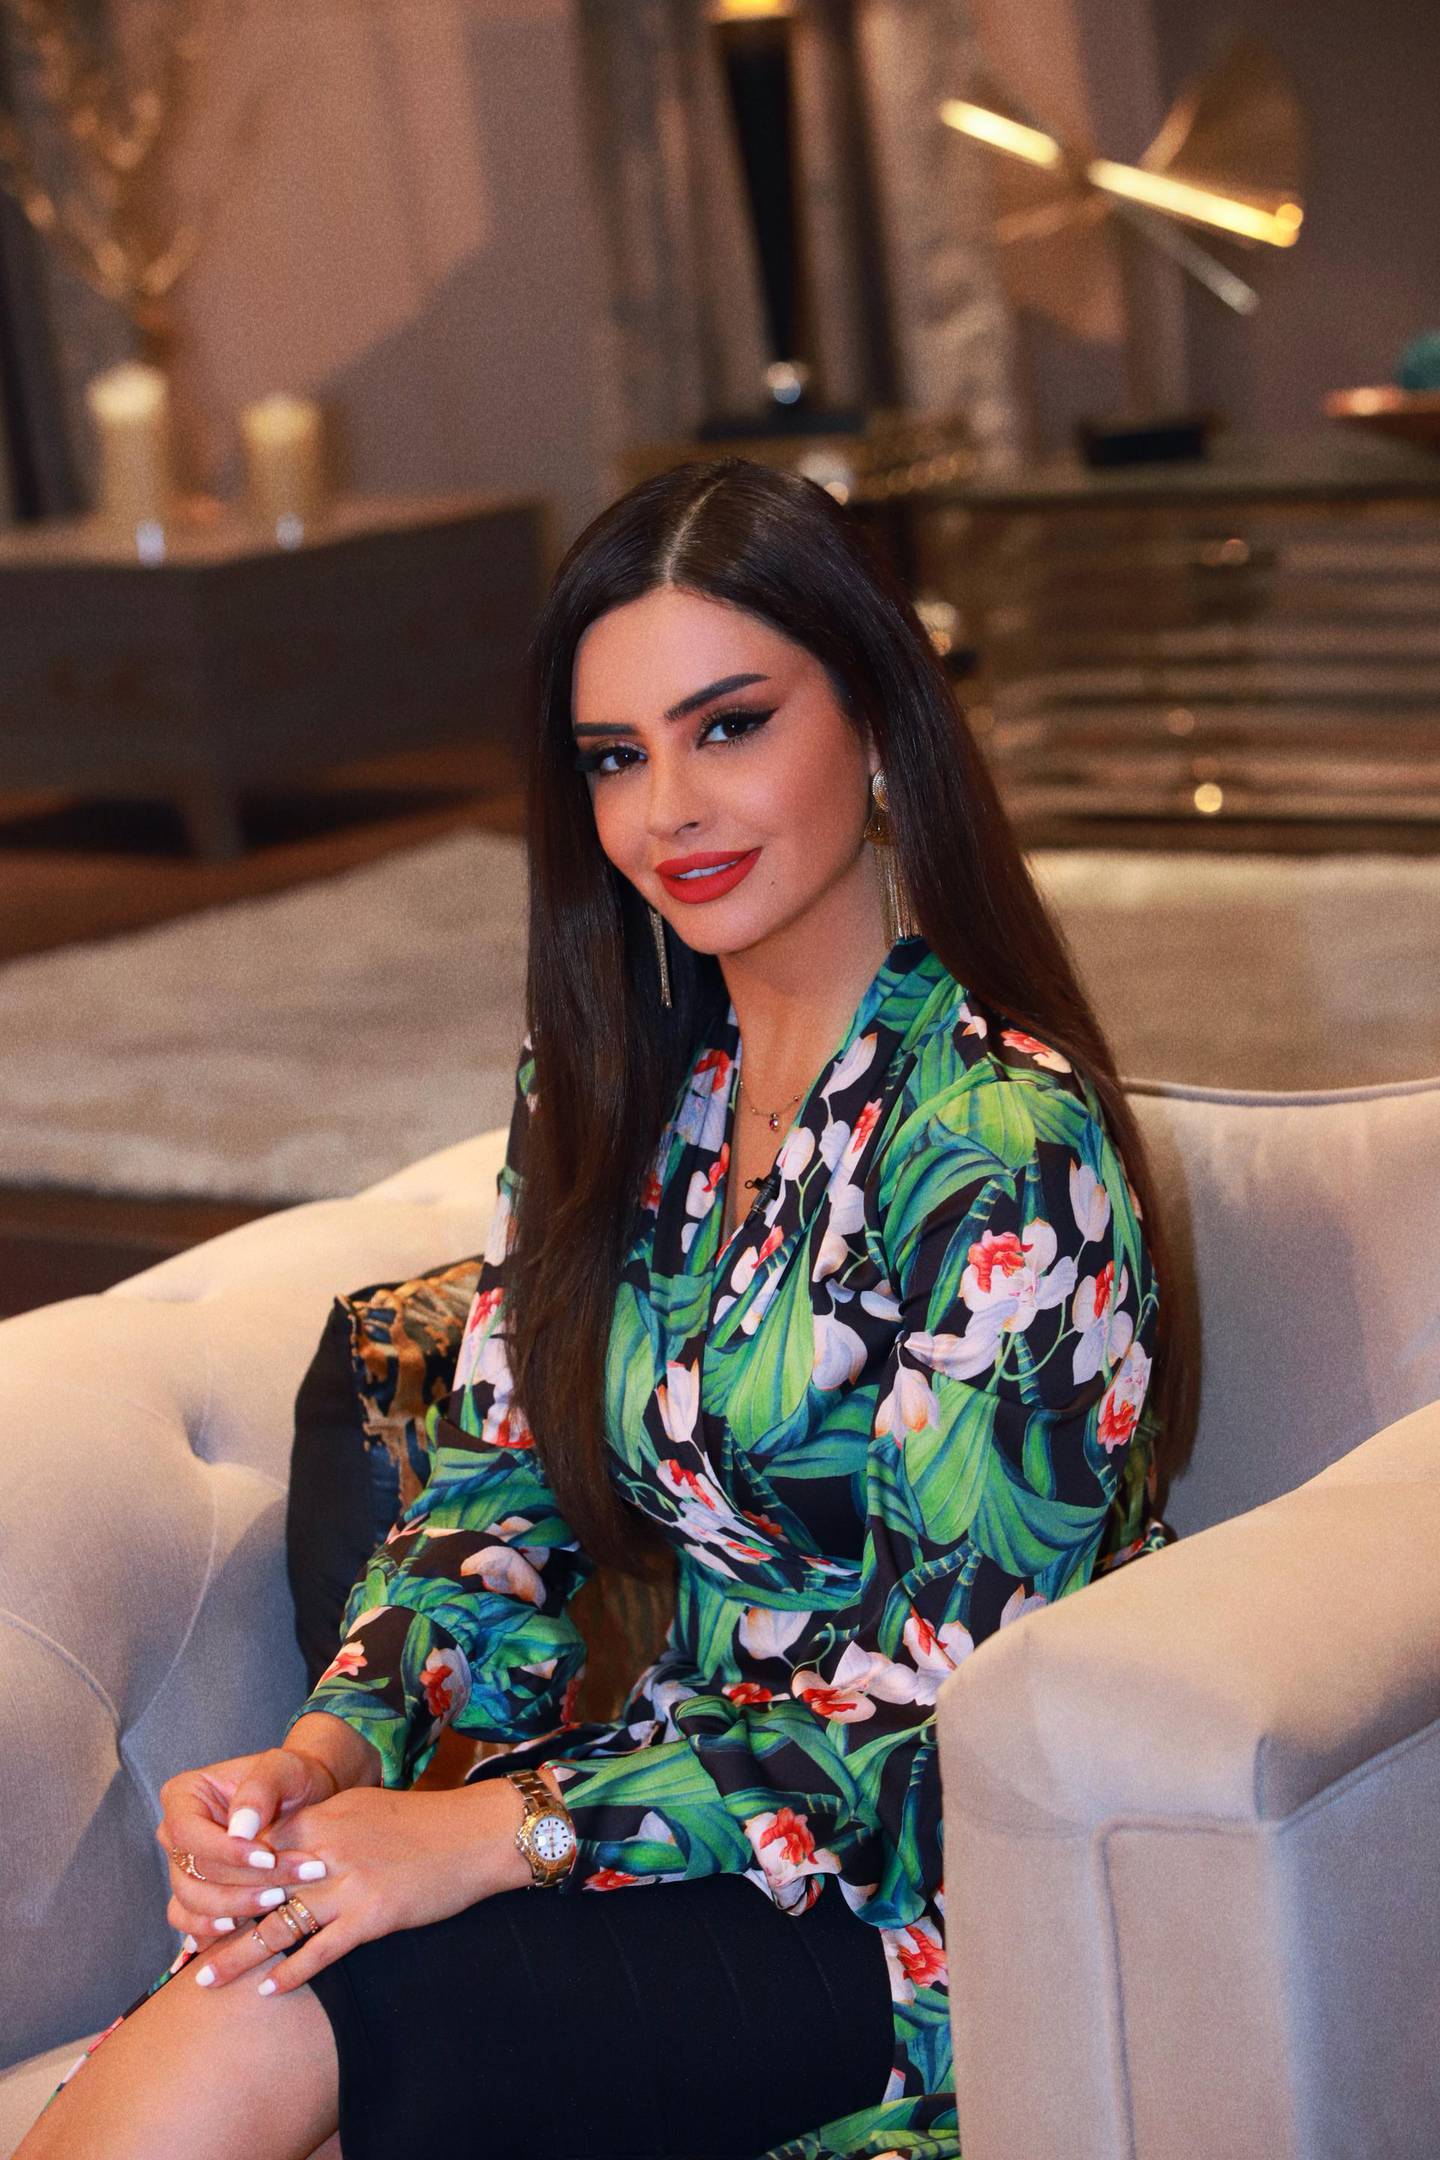 Shahd Al Jumaily is an Iraqi fashion brand owner and lifestyle influencer.